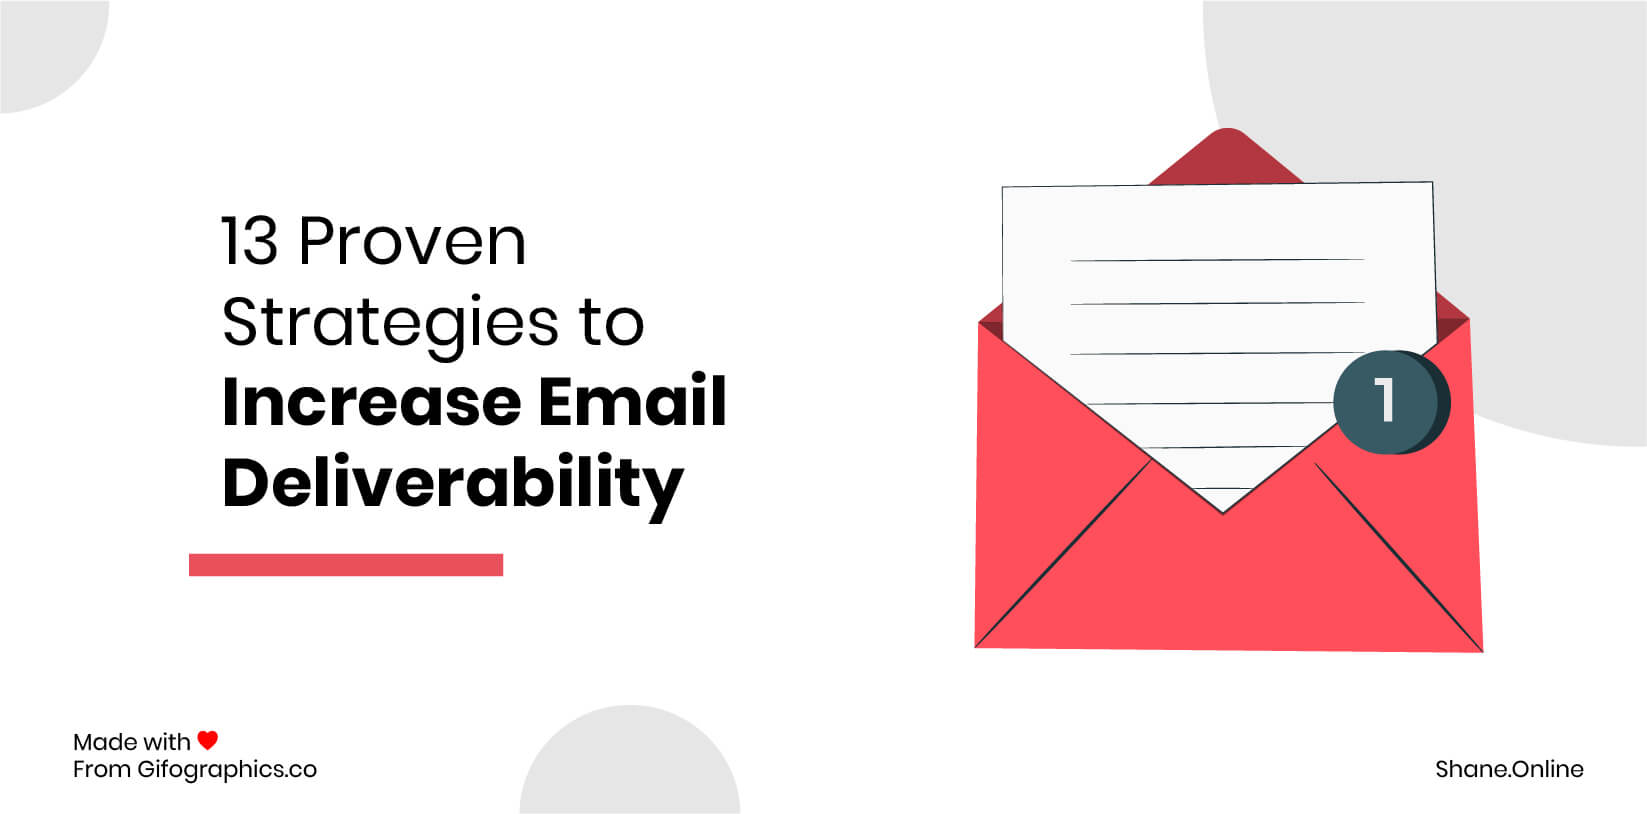 13 Proven Strategies to Increase Email Deliverability